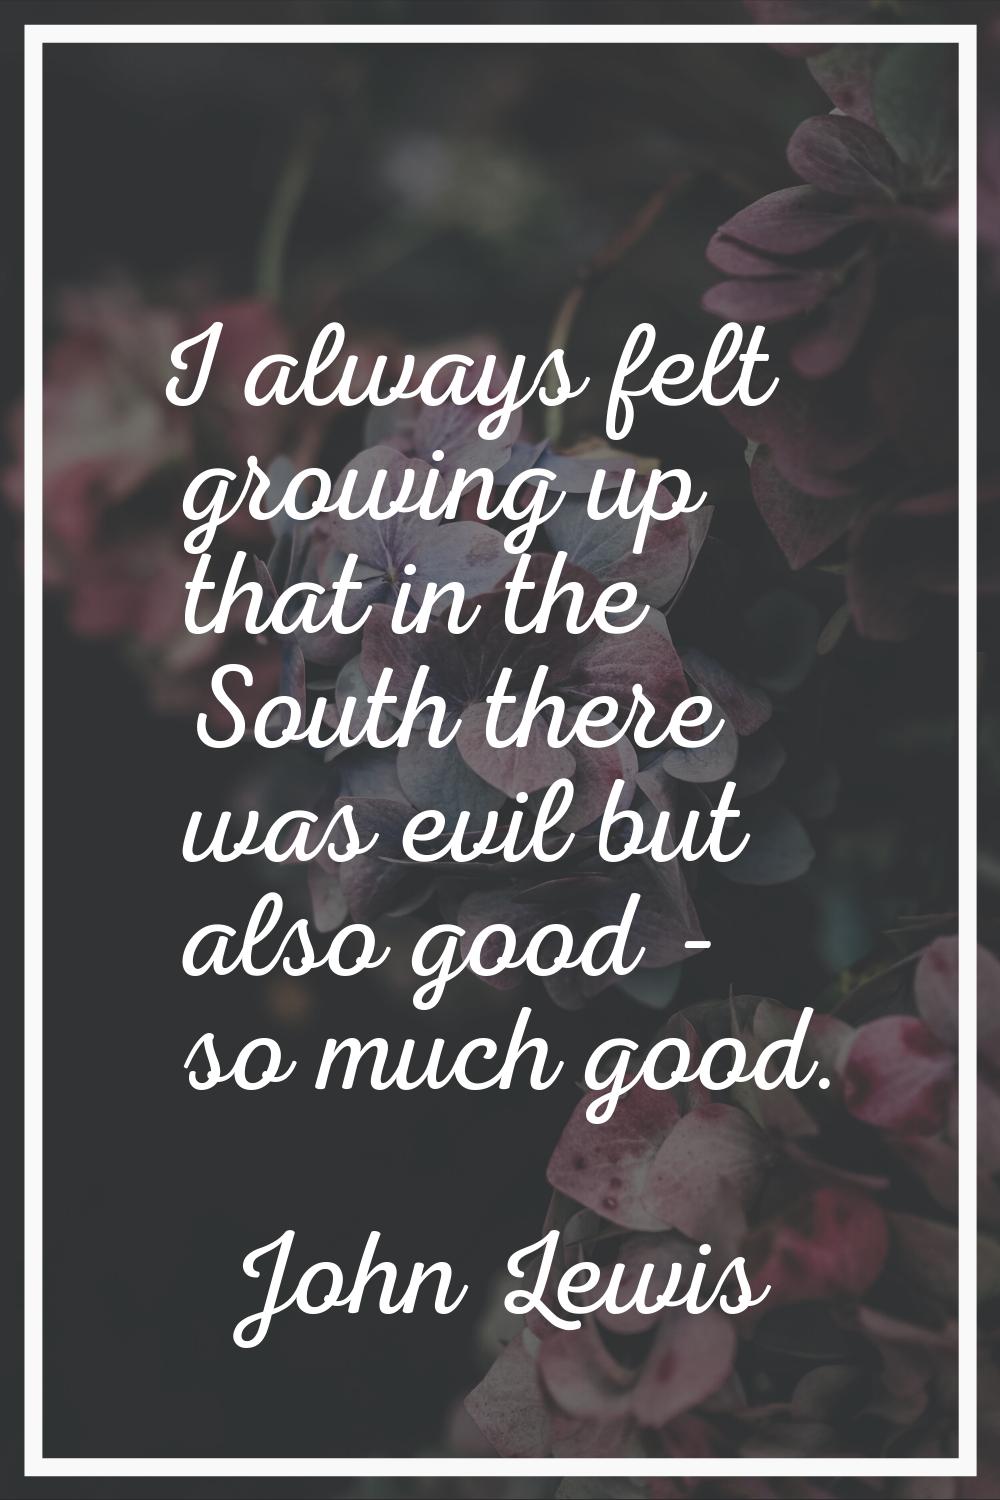 I always felt growing up that in the South there was evil but also good - so much good.